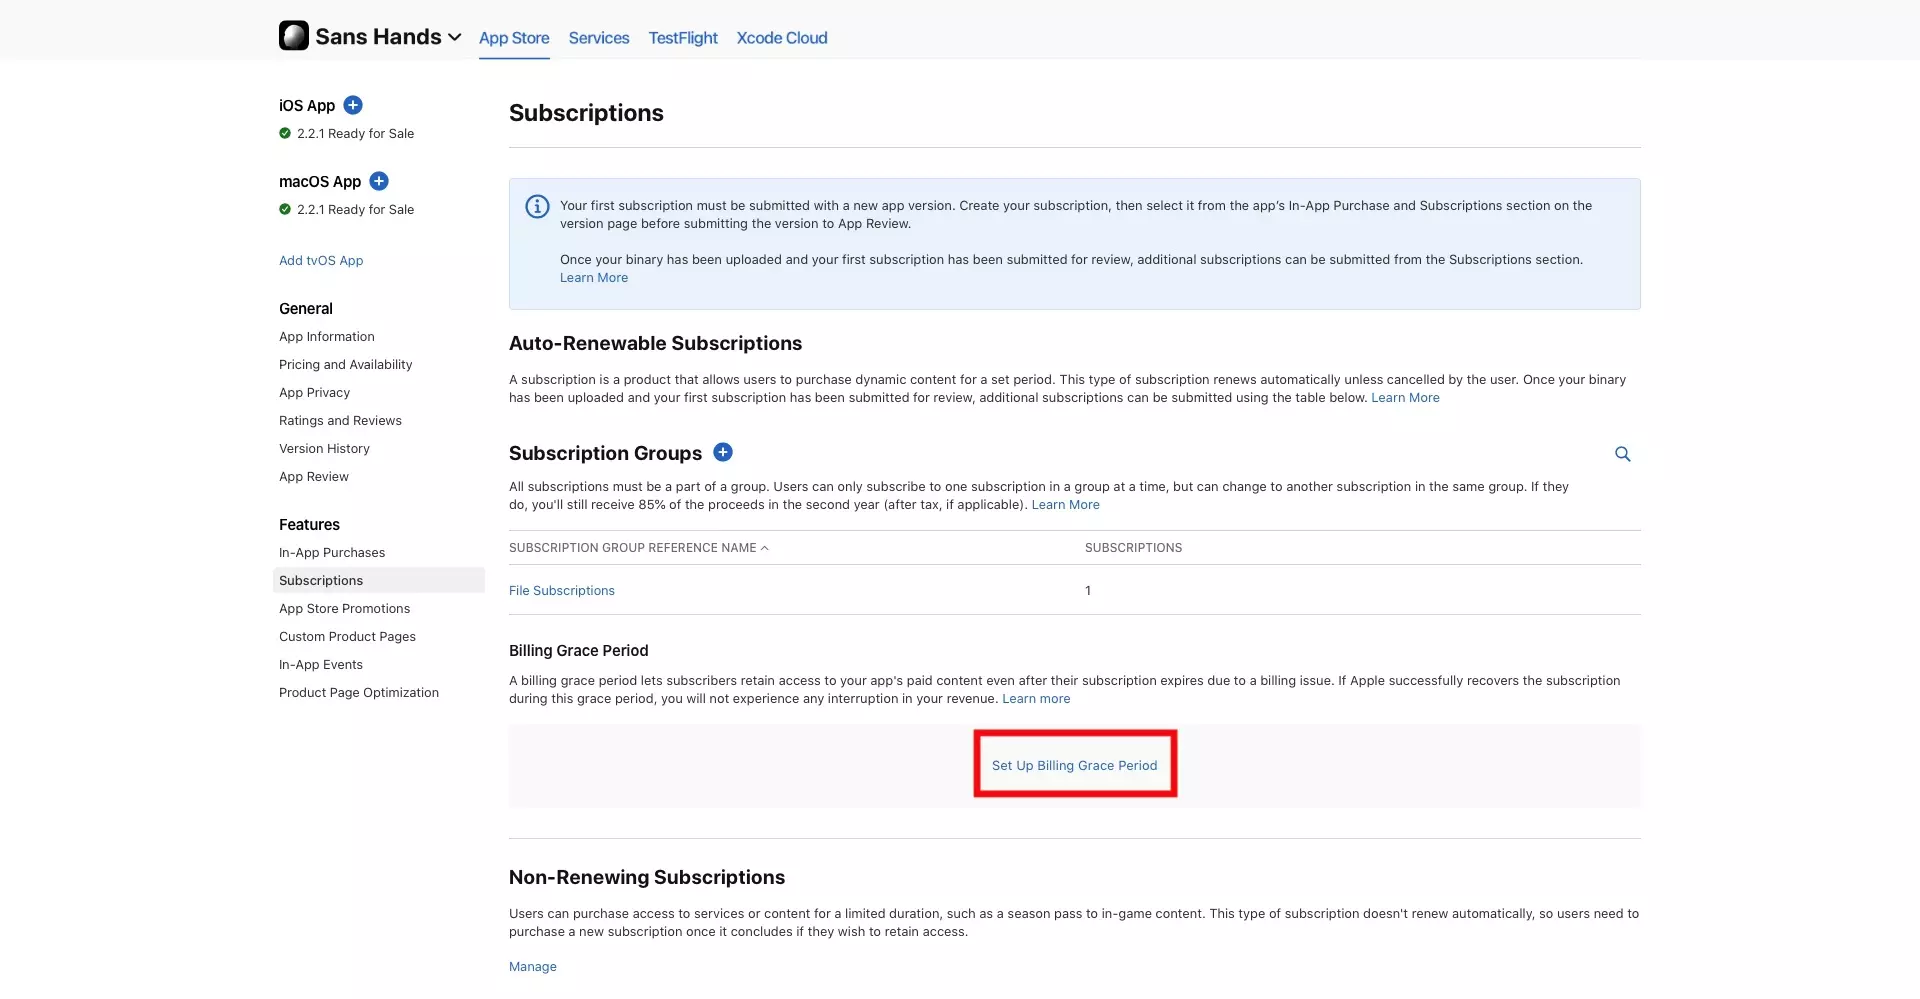 A screenshot of the App Store Connect Subscriptions page with a highlight on the "Set up Billing Grace Period" hyperlink beneath the Billing Grace Period section.